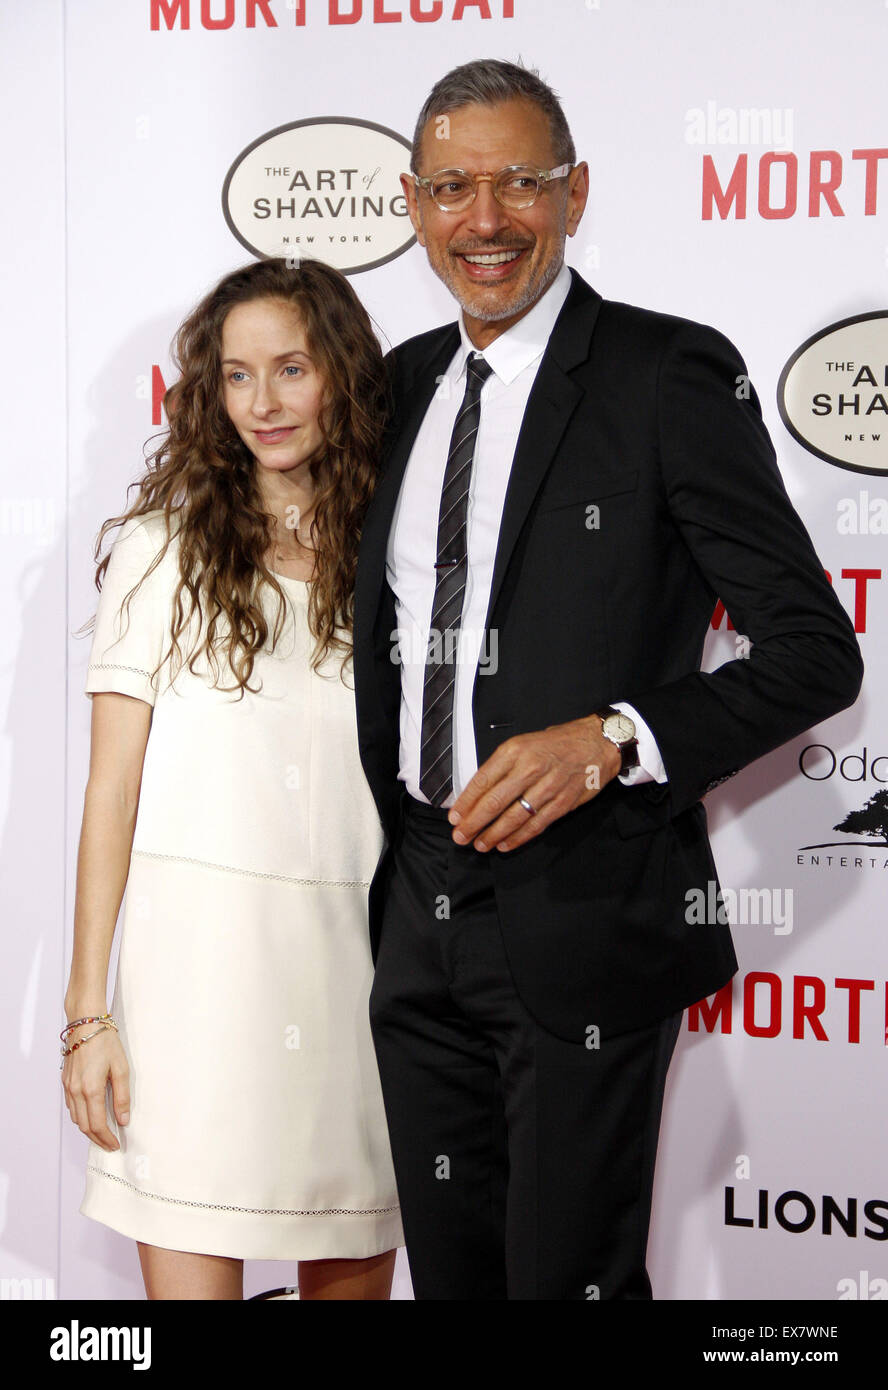 Jeff Goldblum and Emilie Livingston at the Los Angeles premiere of 'Mortdecai' held at the TCL Chinese Theater in Hollywood. Stock Photo